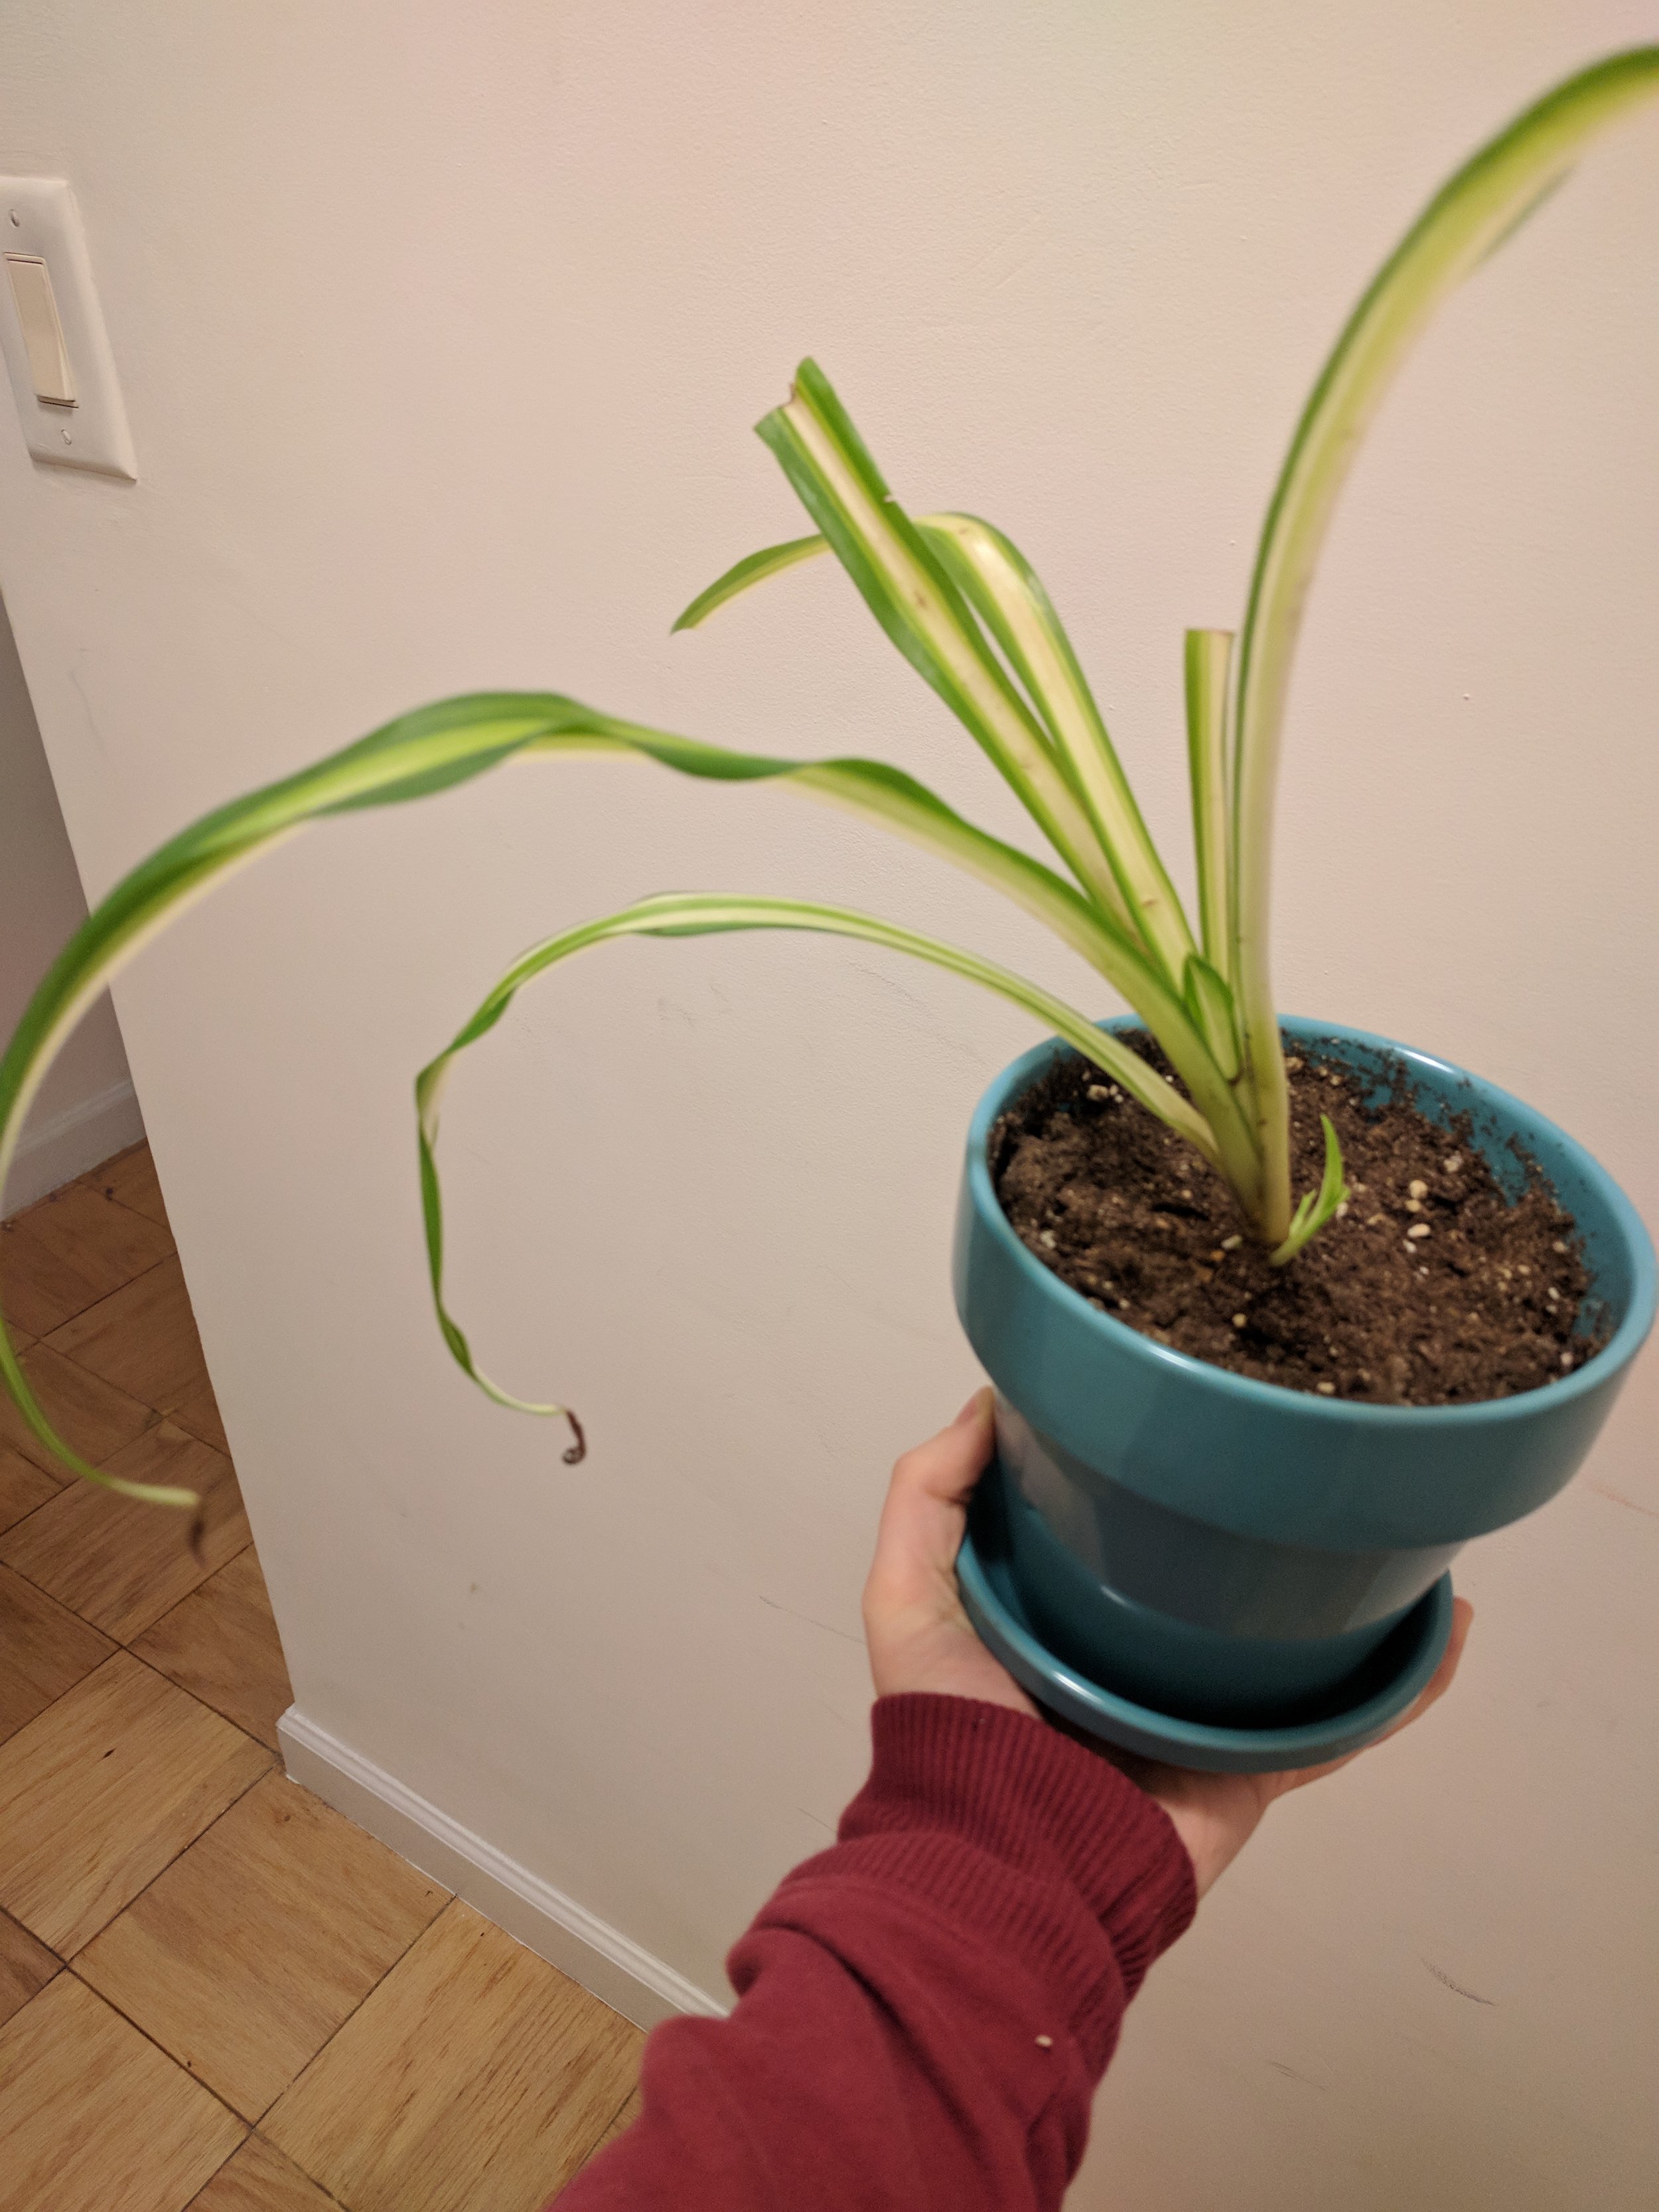  "I'd send you a photo of my pet if I had one, but alas, I live in a small apartment and am away from home for far too many hours of the day to take care of one. The best I have to offer is photos of the bedraggled spider plant that I'm attempting to